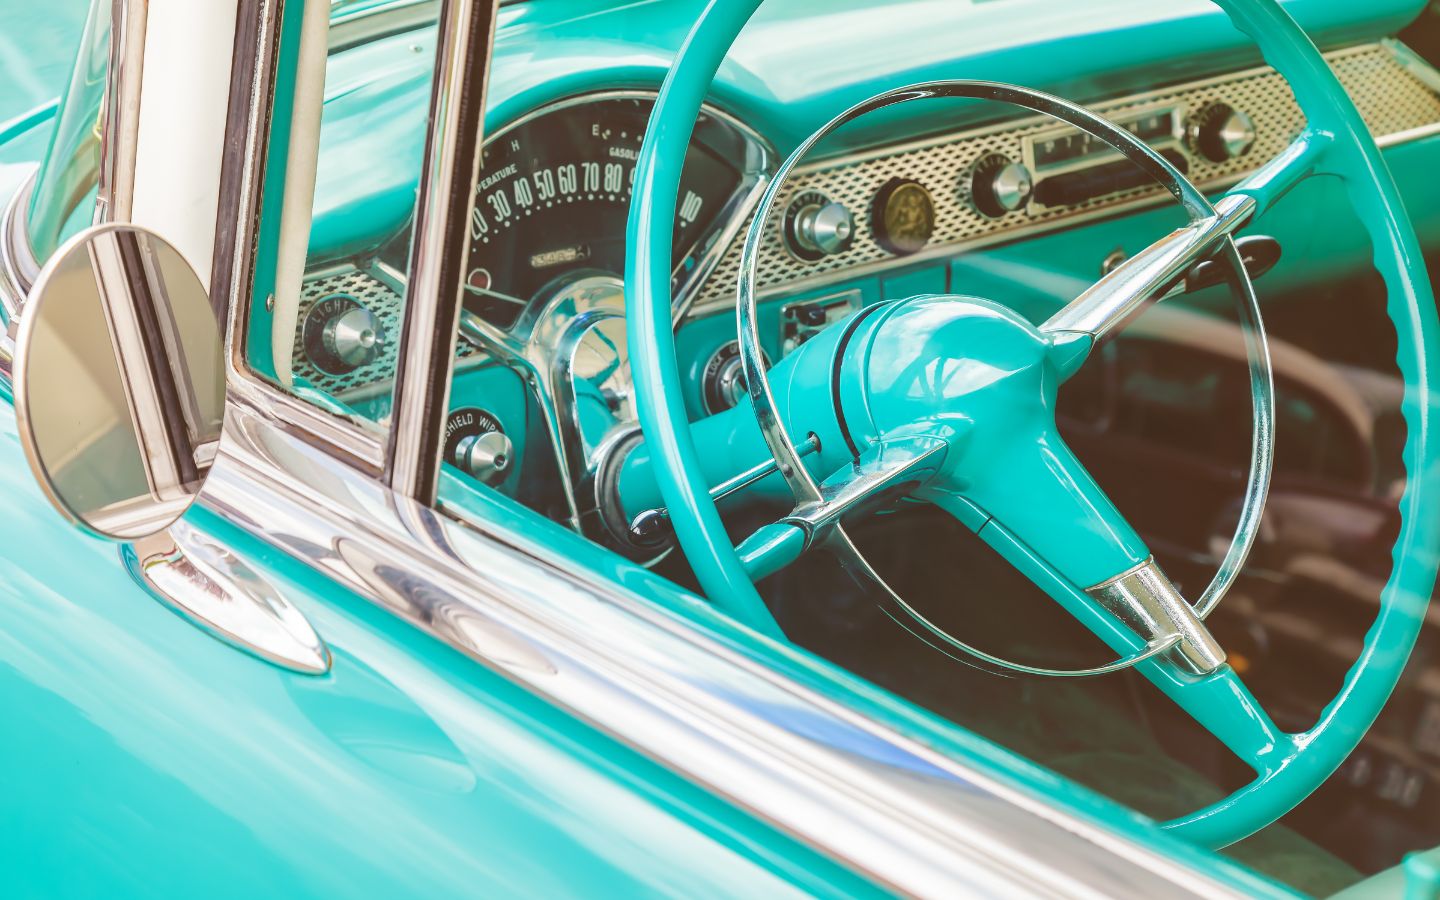 The dashboard and steering wheel of a classic aqua car